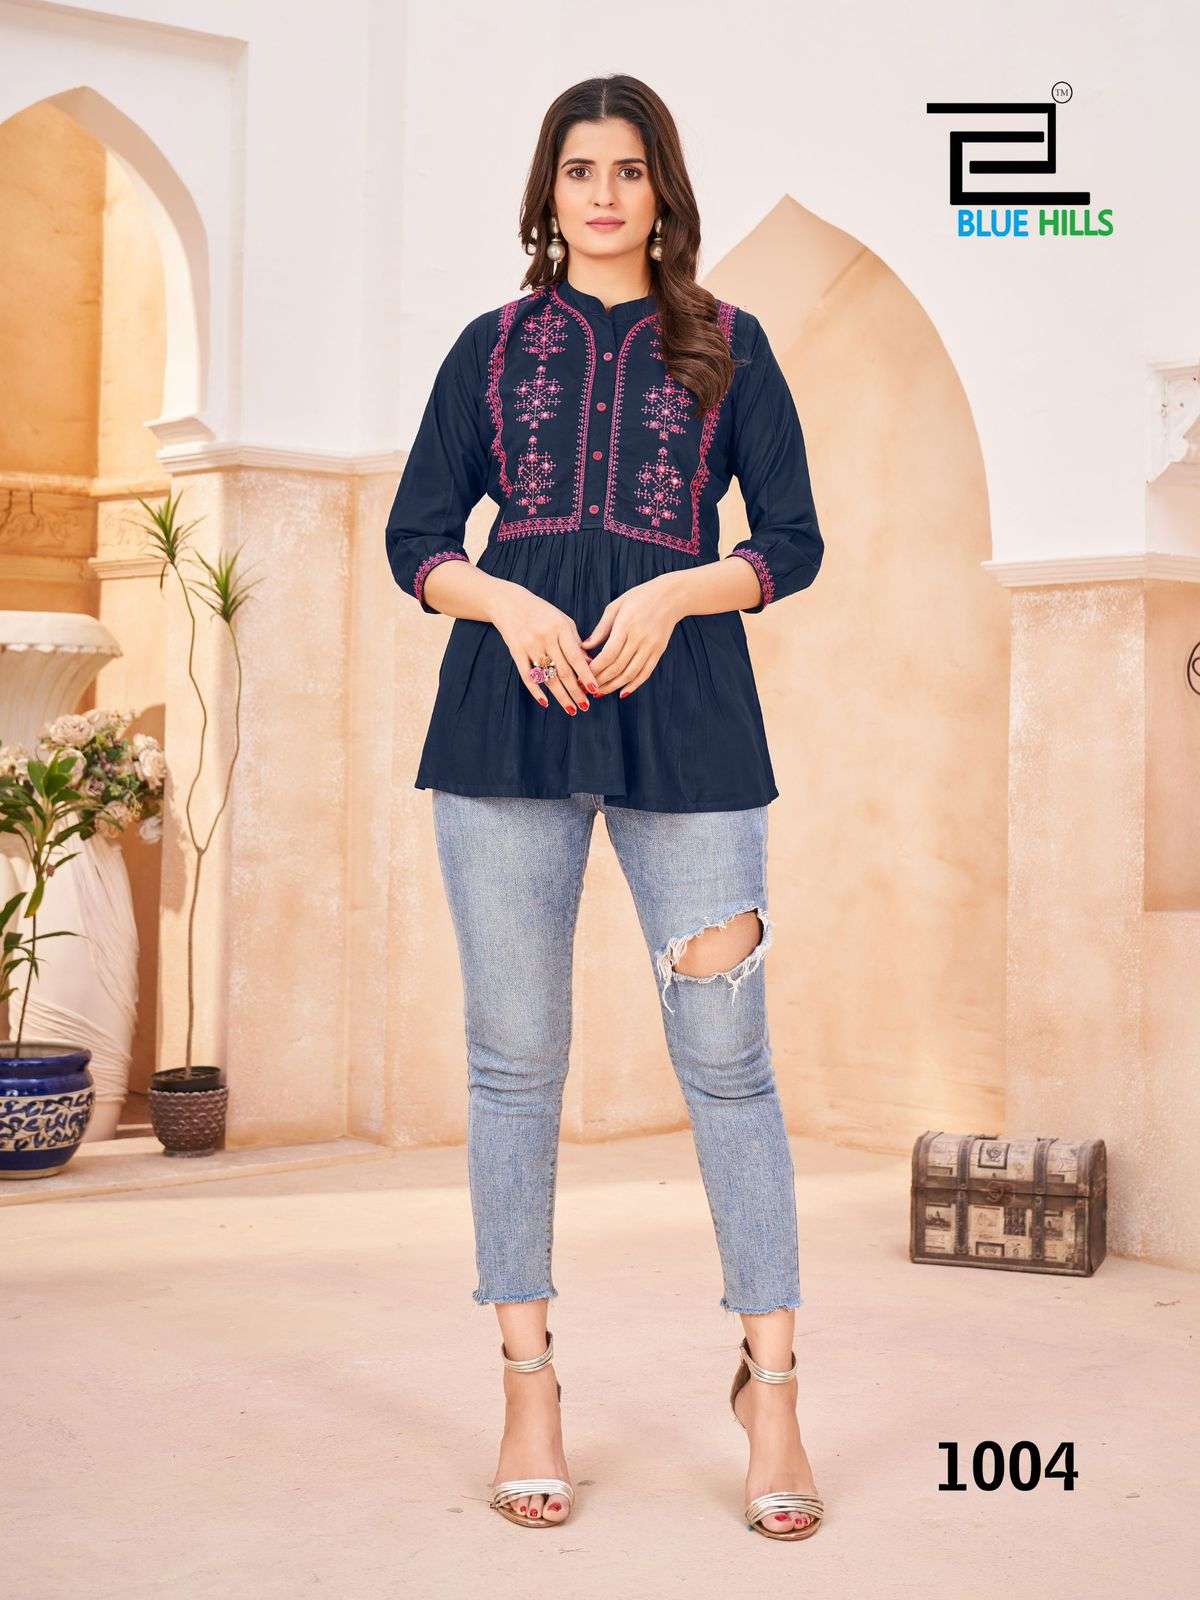 Blue hills black berry 1001-1008 series rayon embroidery work short tops wholesale collection 